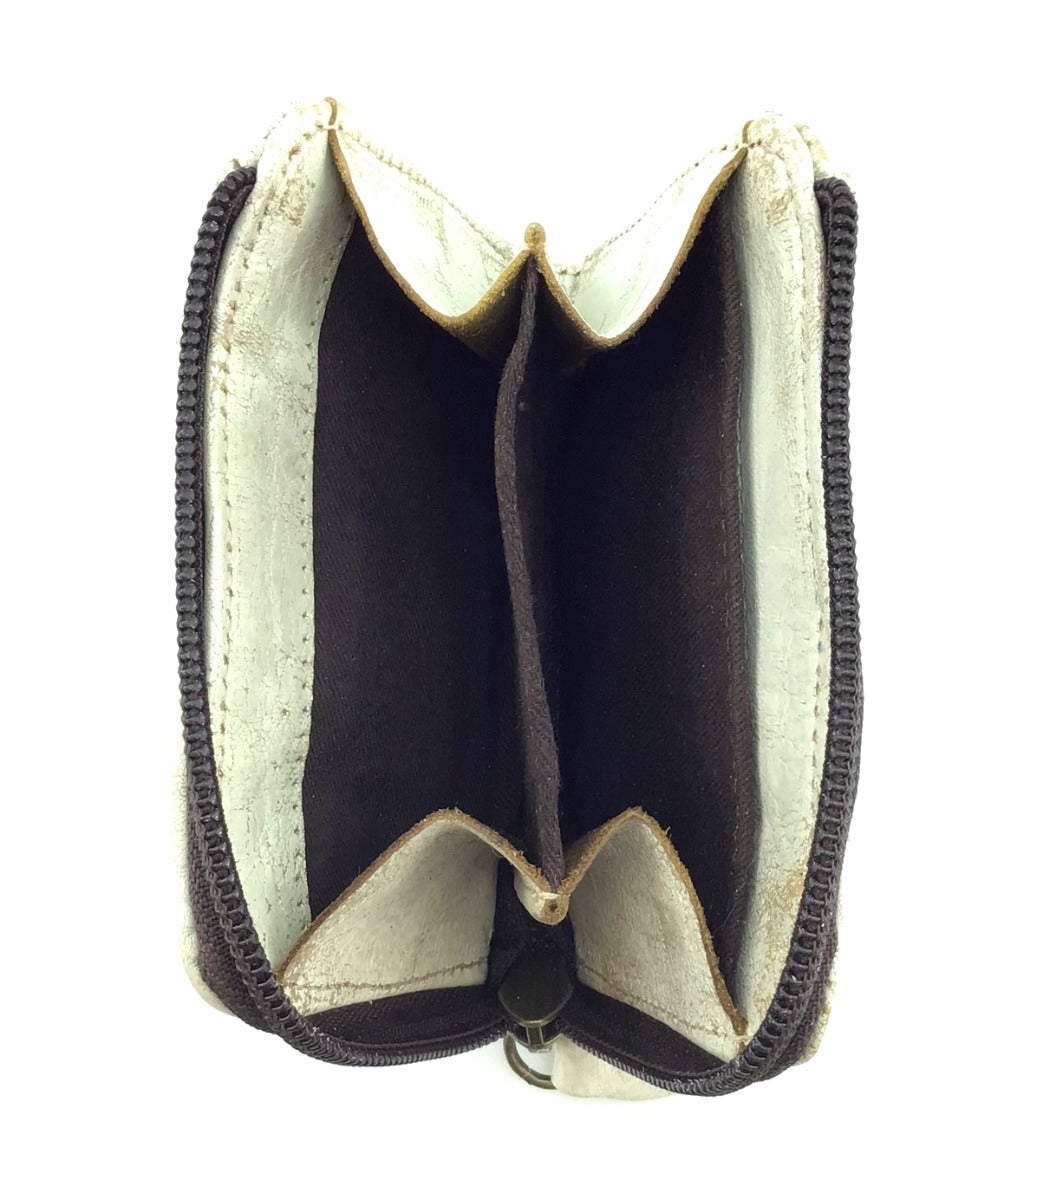 A Bed Stu Carrie wallet with two compartments and a zipper.